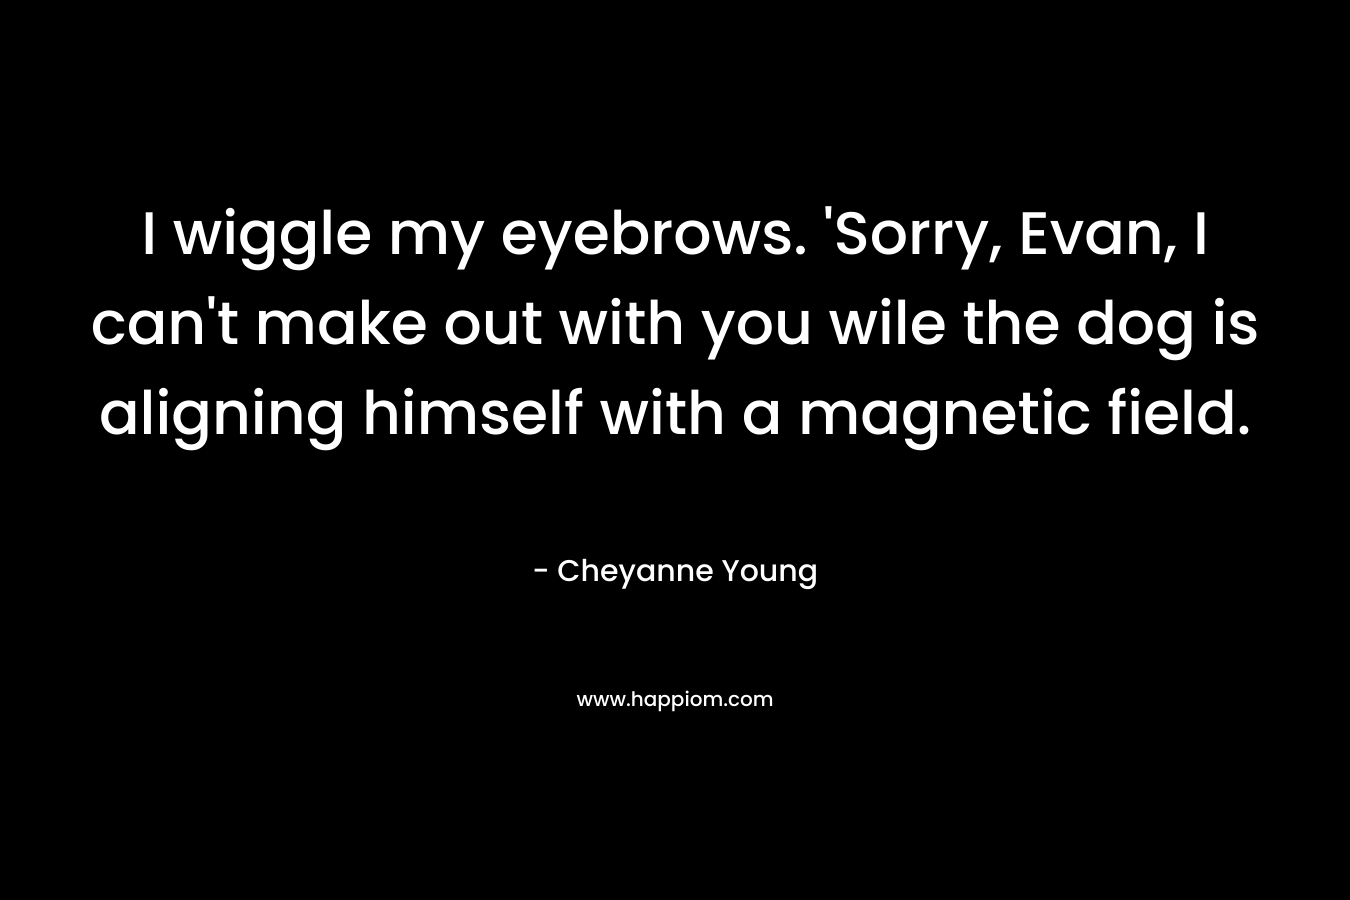 I wiggle my eyebrows. 'Sorry, Evan, I can't make out with you wile the dog is aligning himself with a magnetic field.